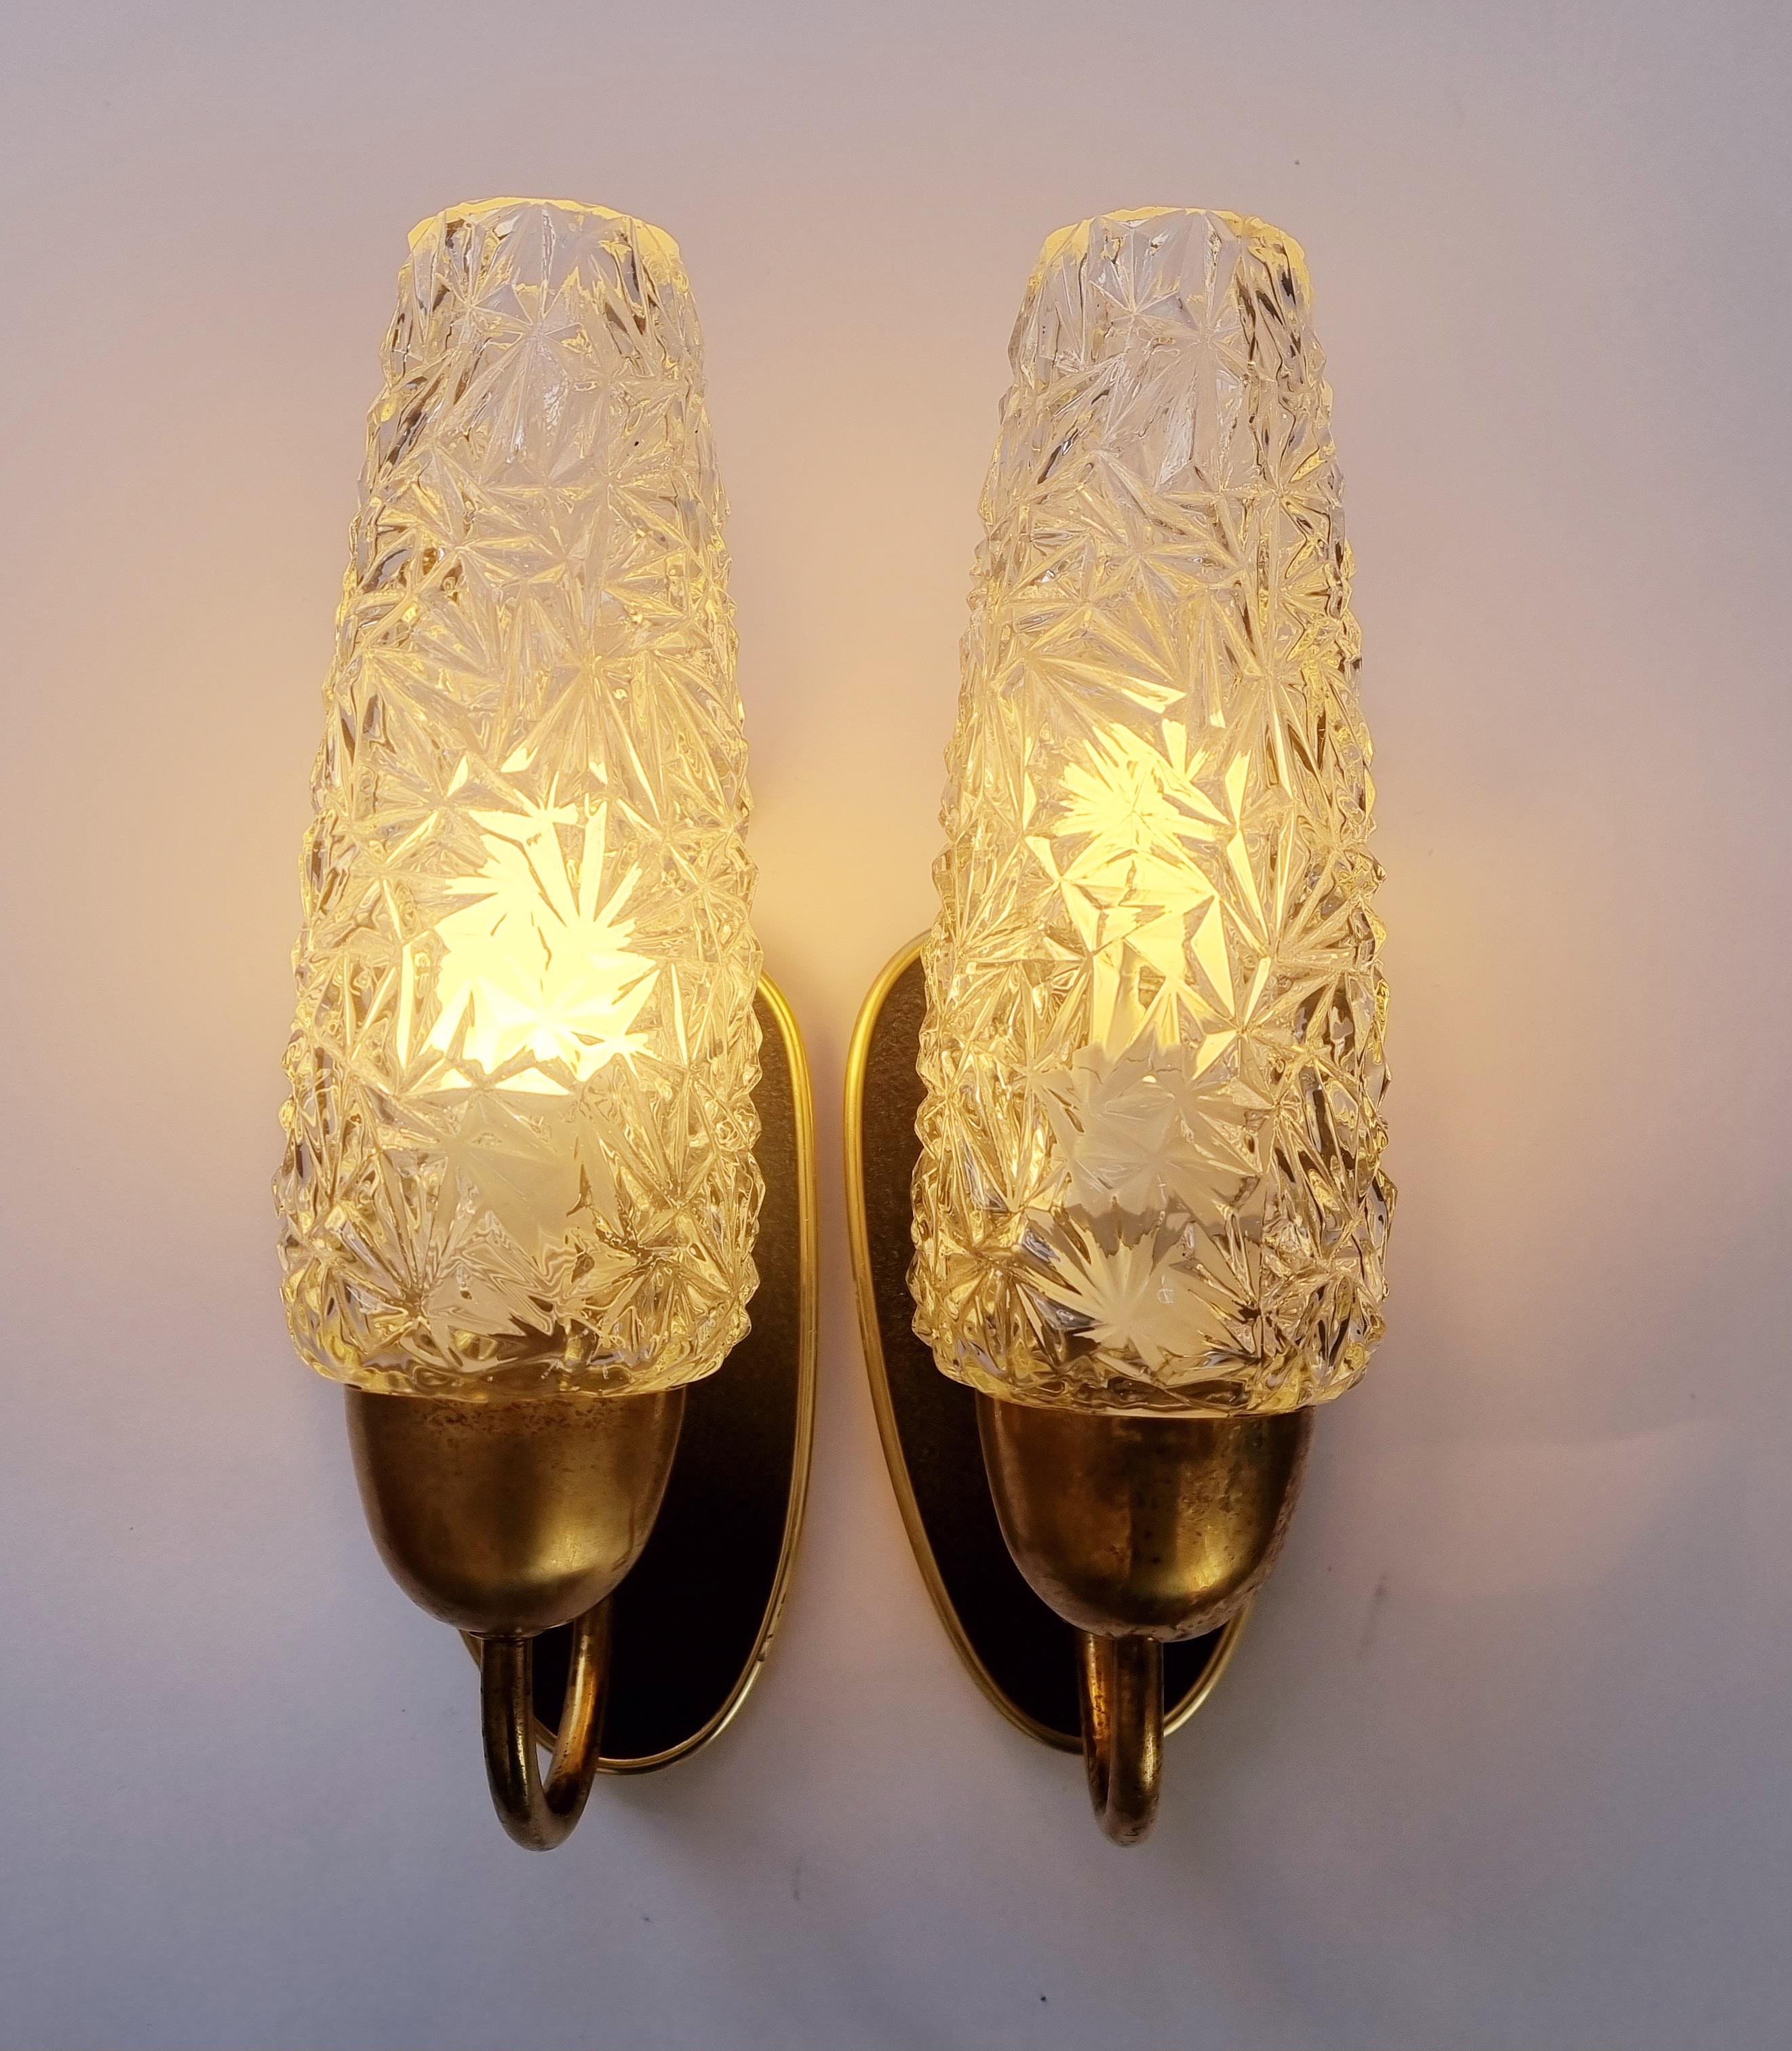 Pair of Rare Midcentury Wall Lamps, Germany, 1960s For Sale 9